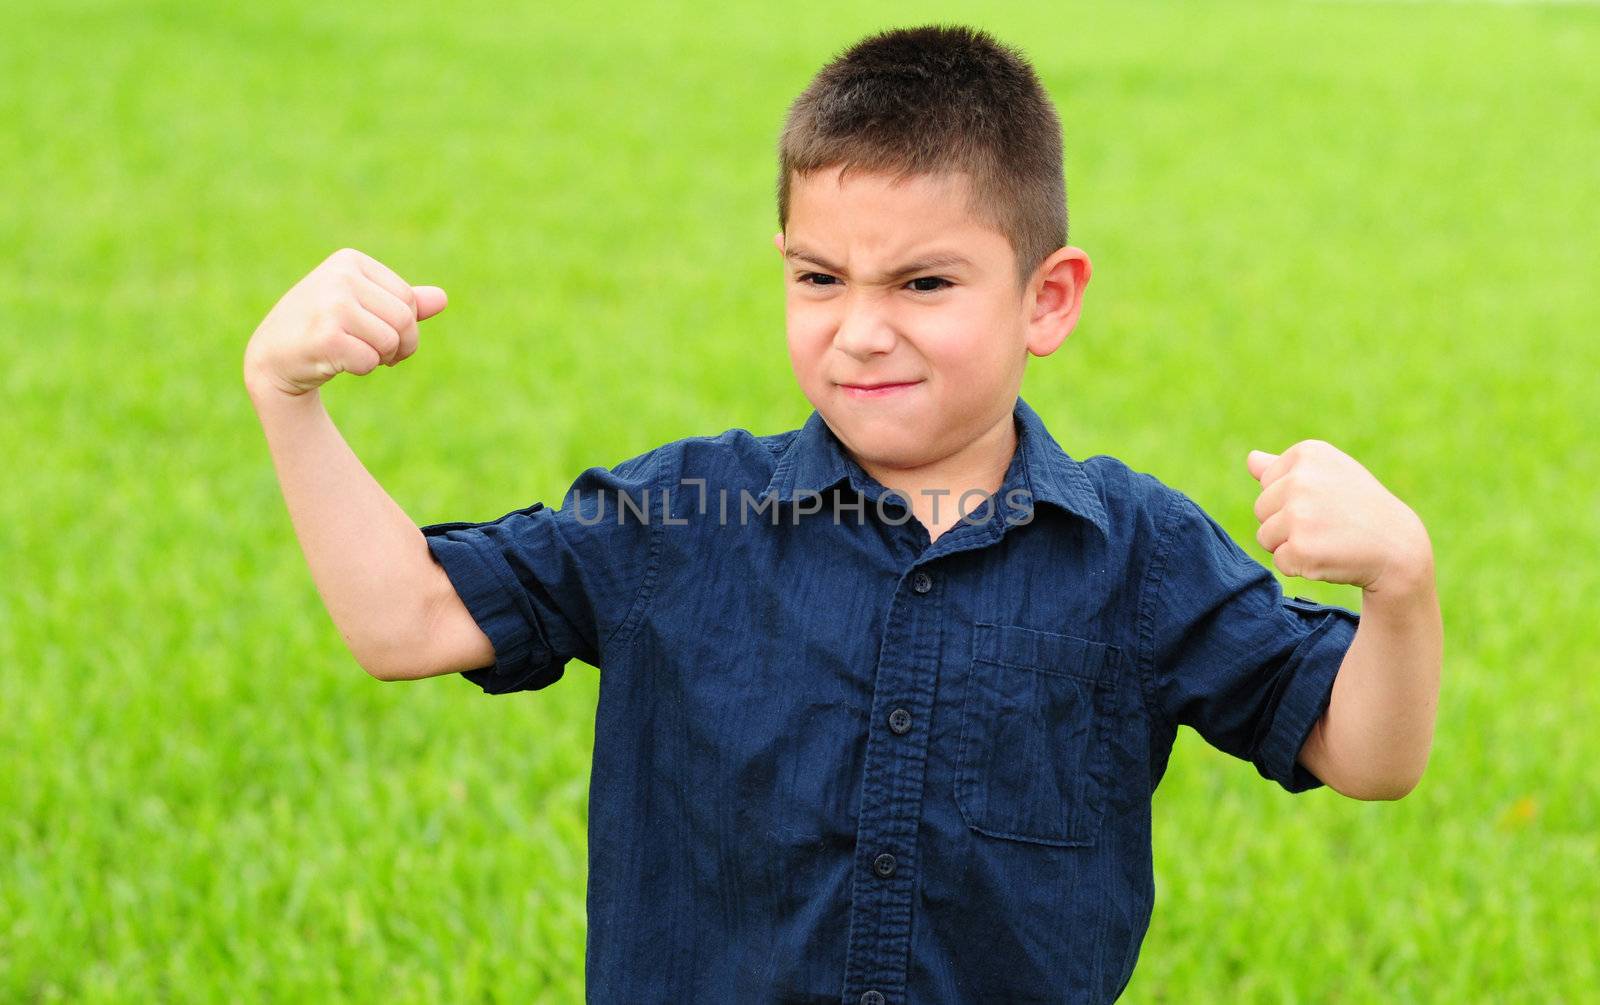 young boy flexing his muscles by ftlaudgirl